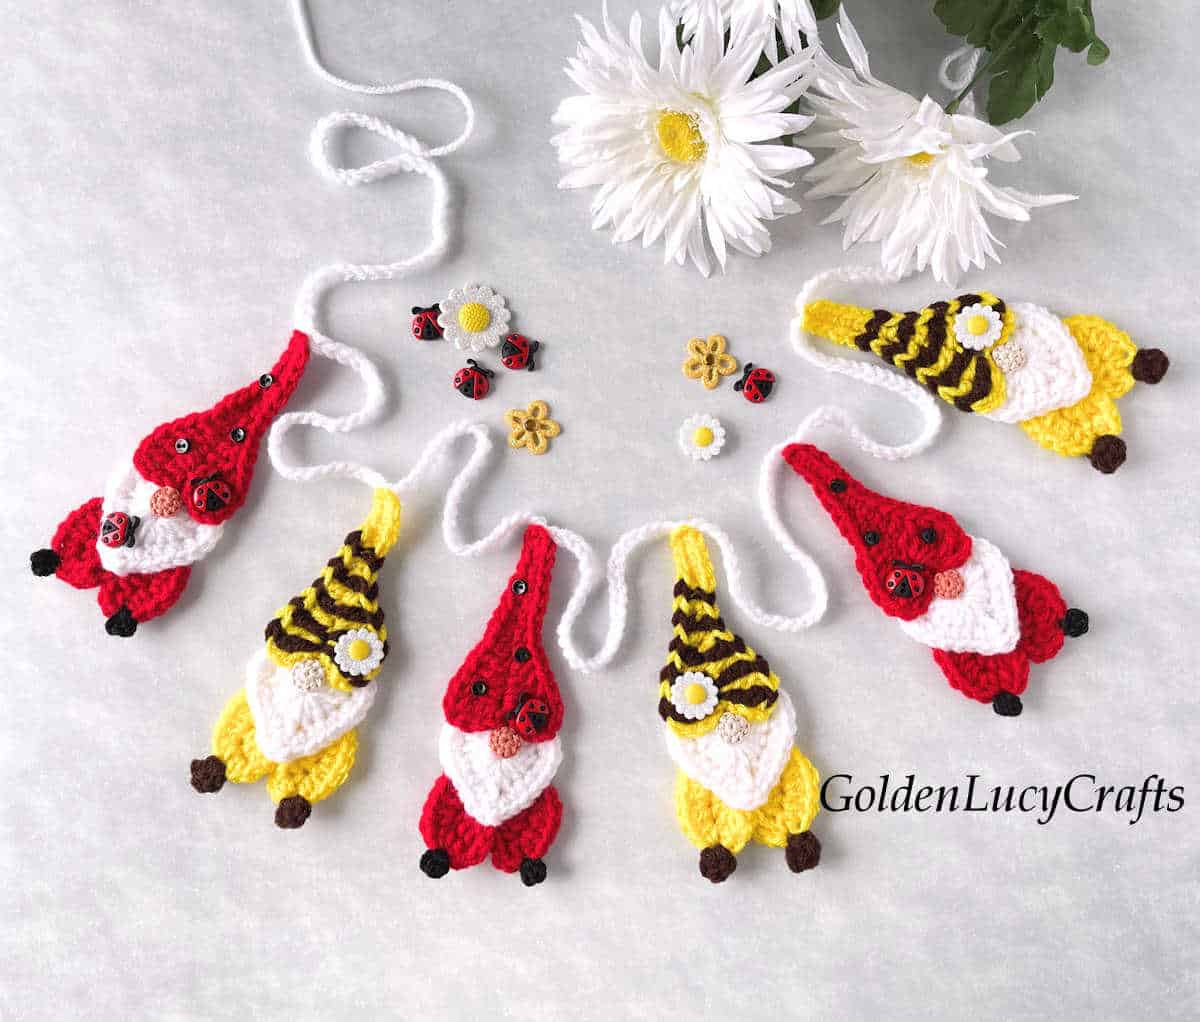 Crochet garland or bunting made from bee and ladybug gnomes.